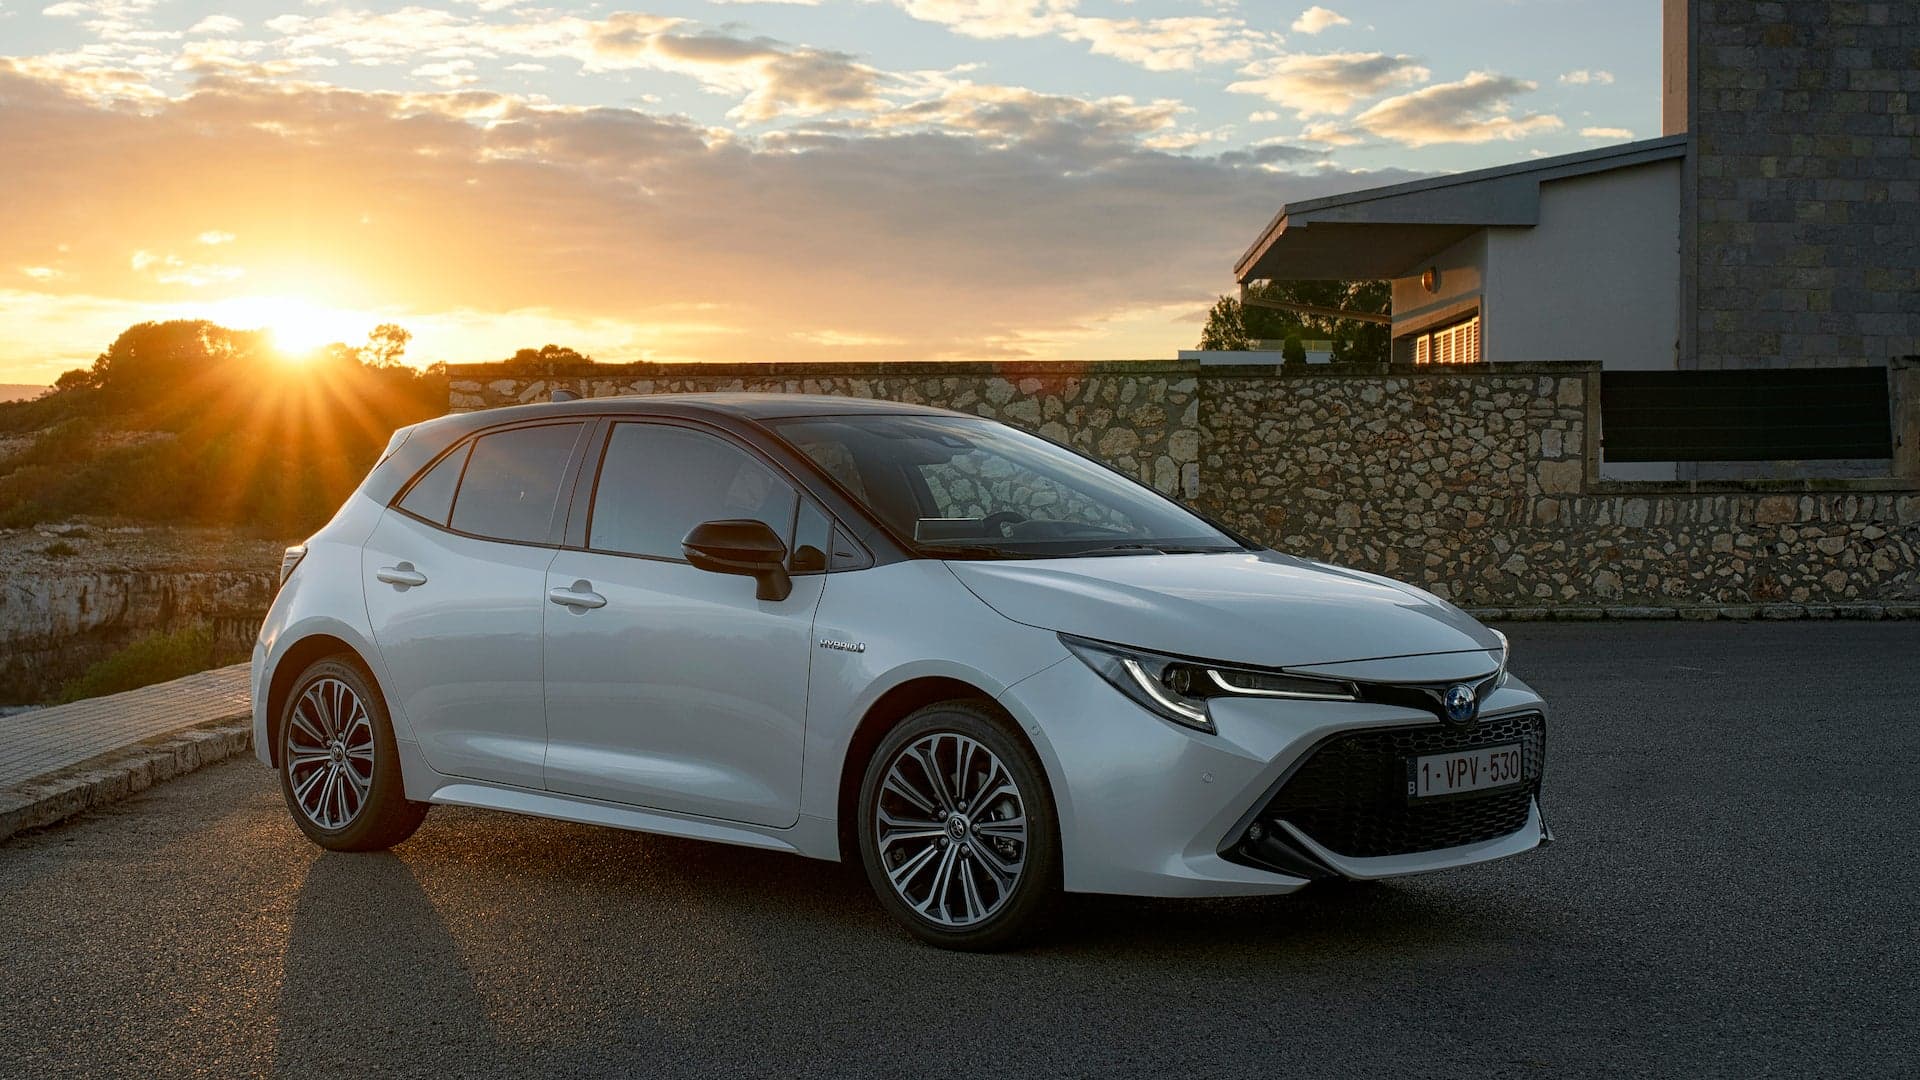 US-Bound Toyota Corolla Hot Hatch Will Offer Six-Speed Manual, AWD: Report